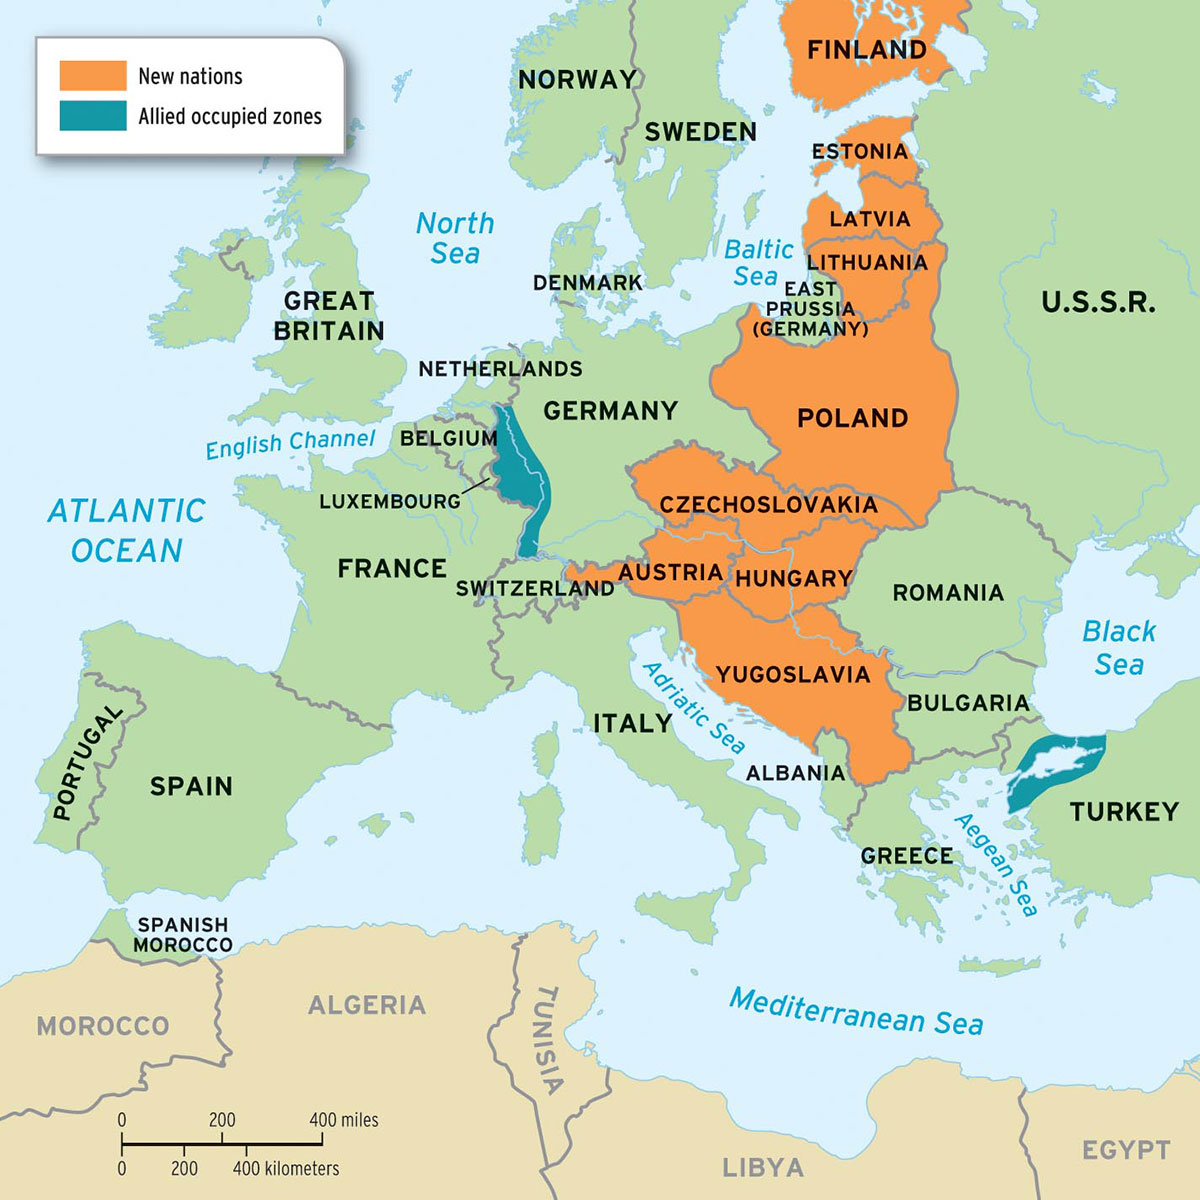 Wwi Transformed The Map Of Europe Could It Change Again